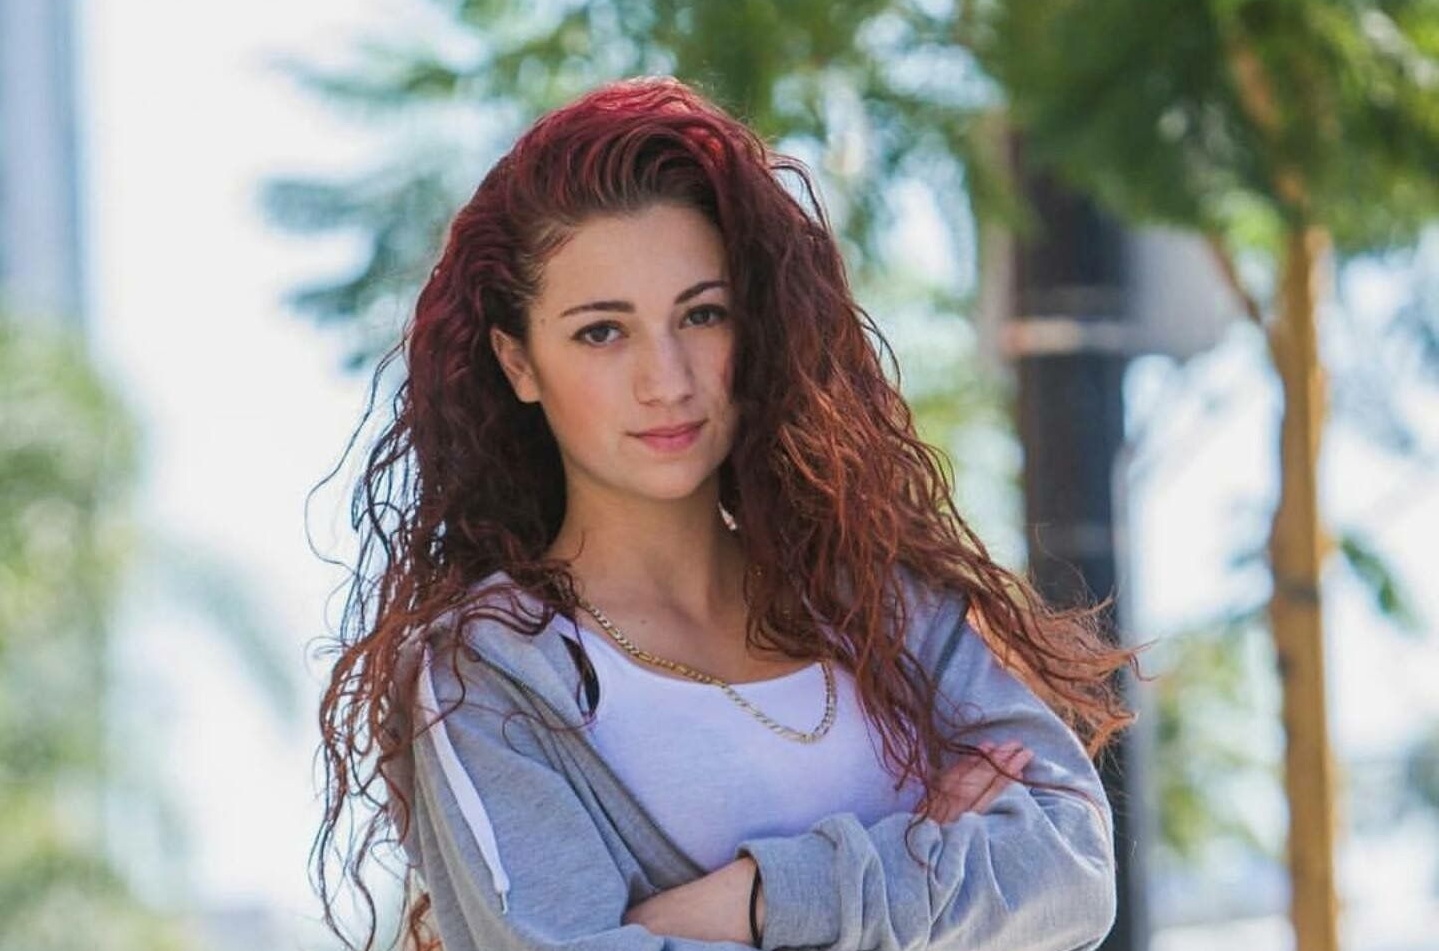 Danielle Bregoli Hot Bikini Pictures – Look Too Sexy After Plastic Surgery